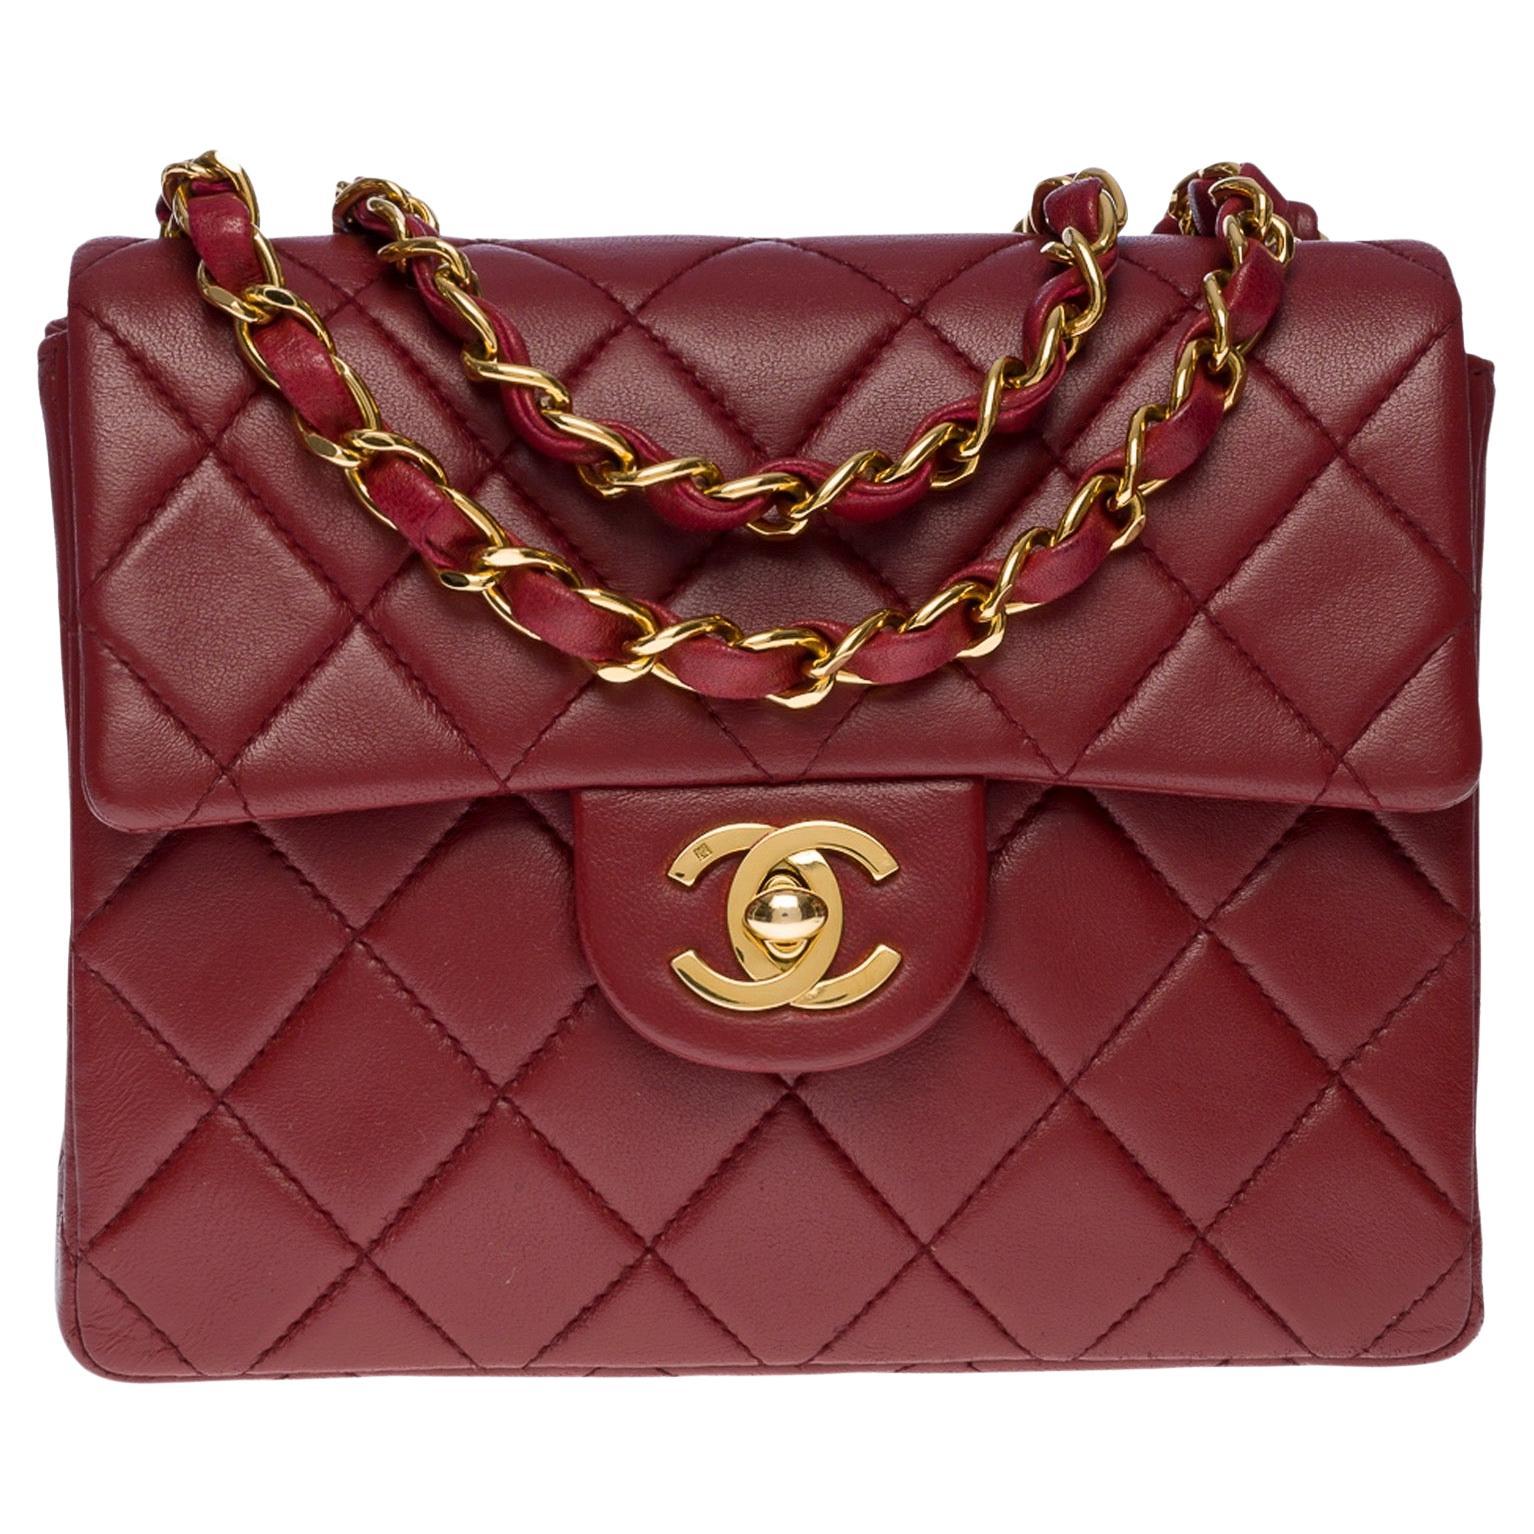 Splendid Chanel Timeless Mini flap bag in burgundy quilted leather, GHW